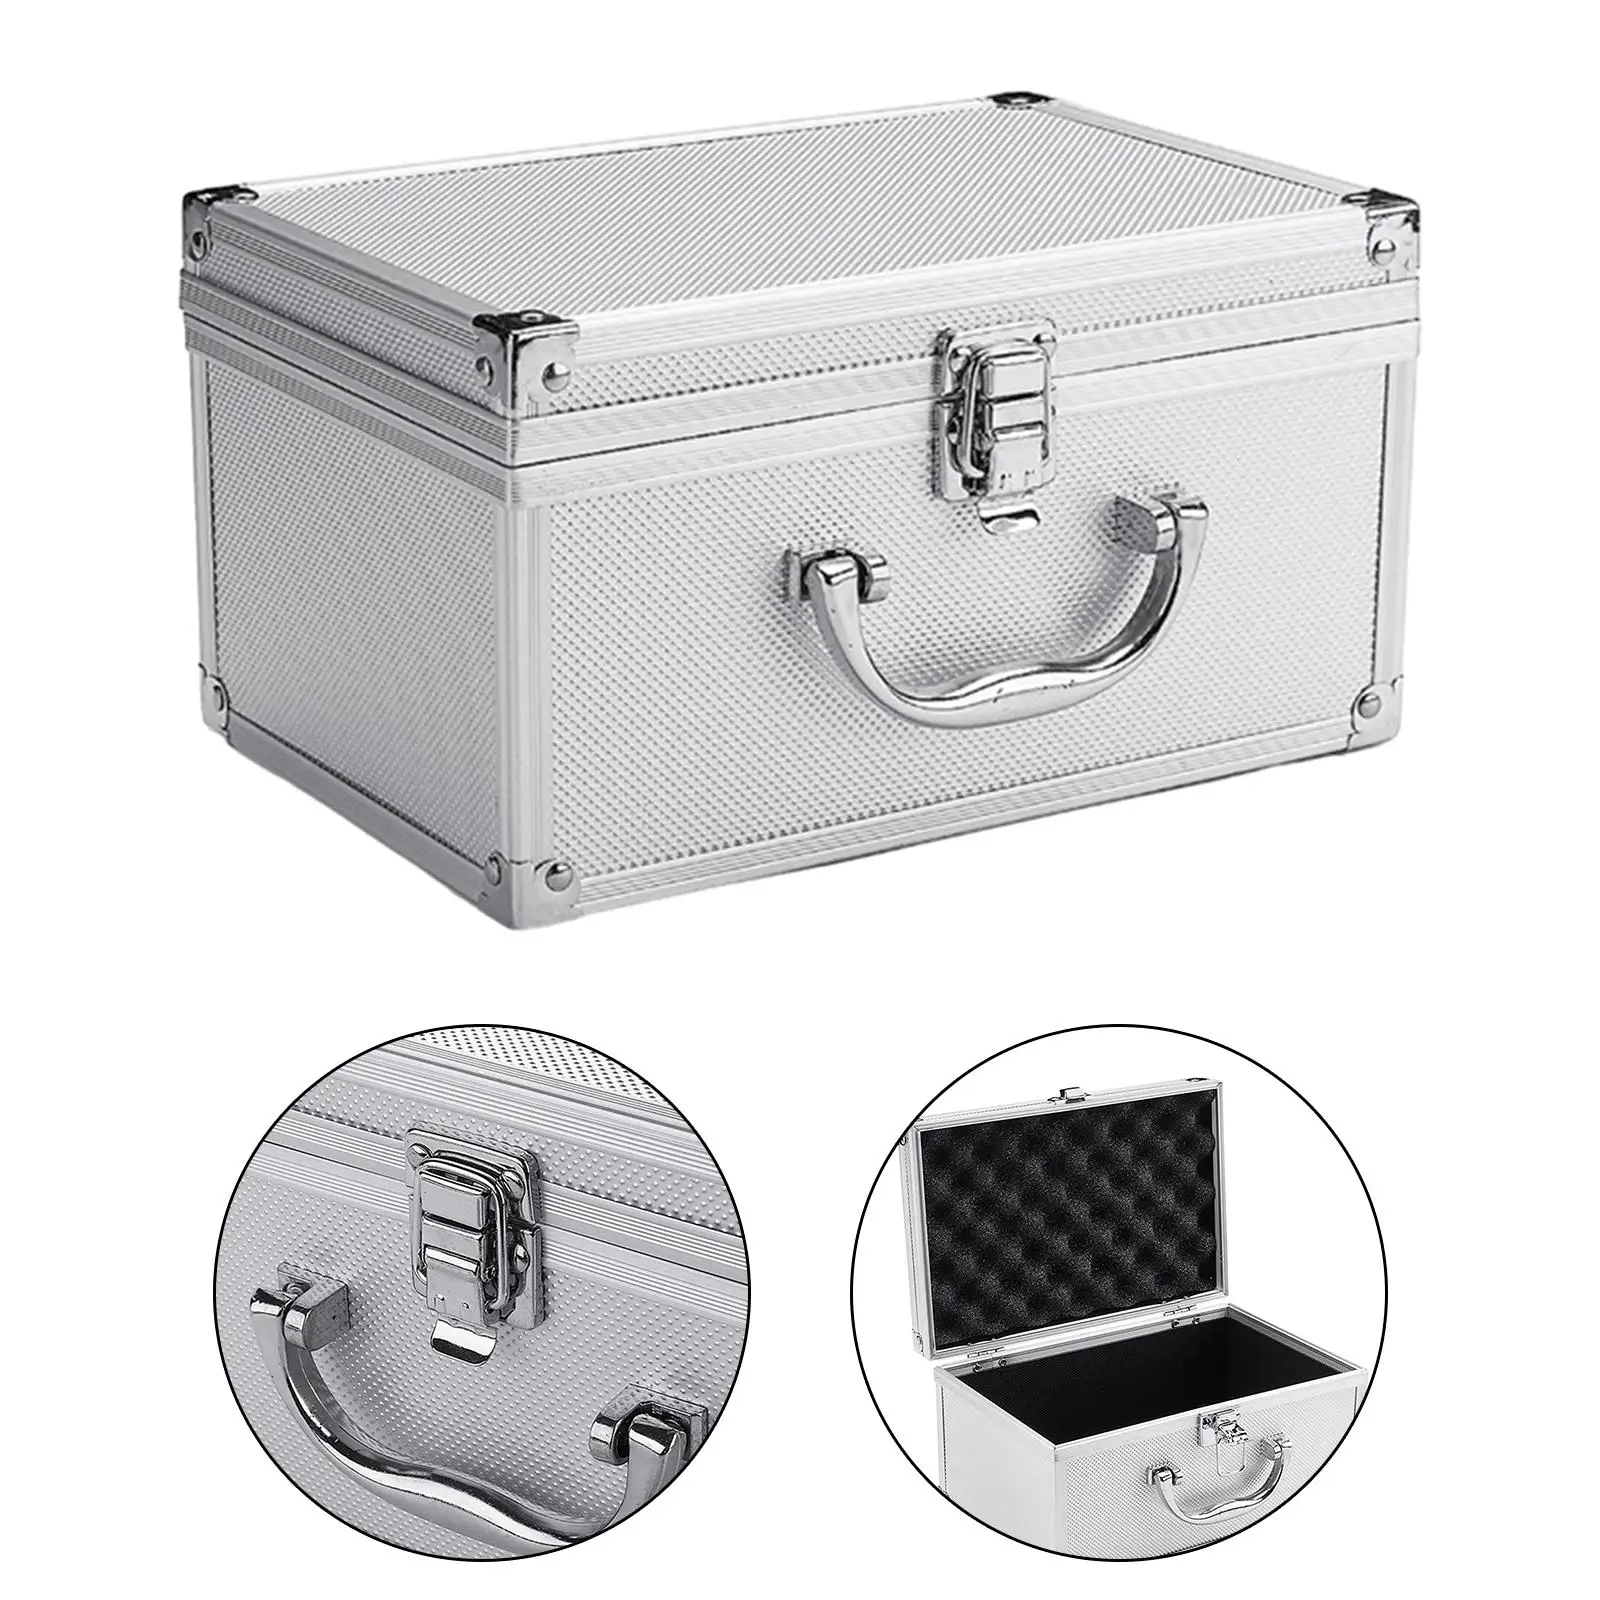 Toolbox Storage Box Electrician Repairs Box Suitcase Durable Drill Set Toolbox Multifunction Carrying Case for Household Car